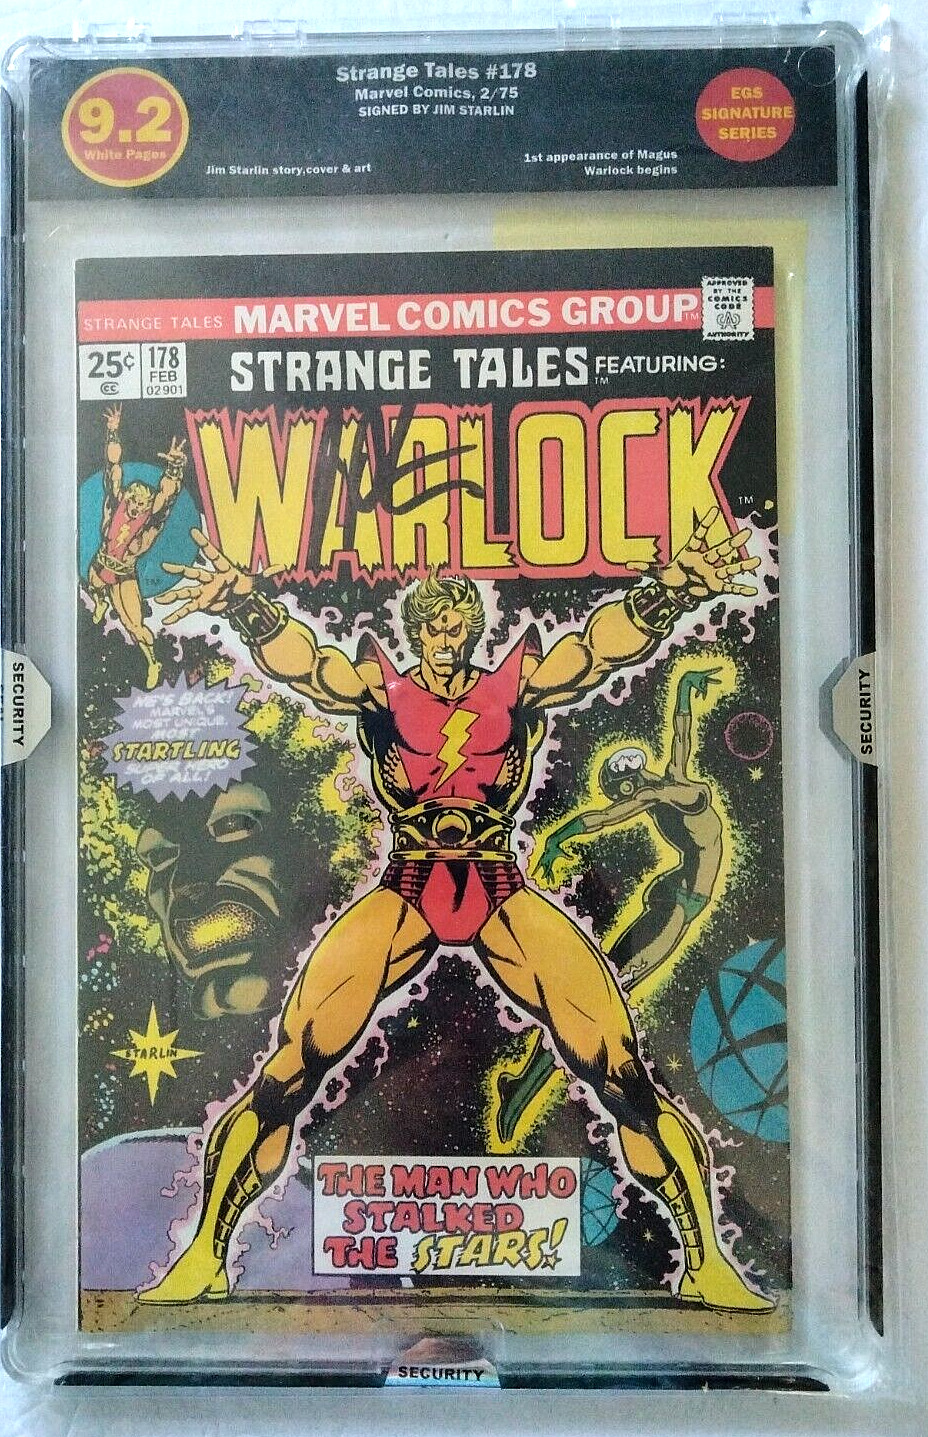 EGS SS SERIES 9.2 WHITE PAGES STRANGE TALES #178 SIGNED BY JIM STARLIN 2/75